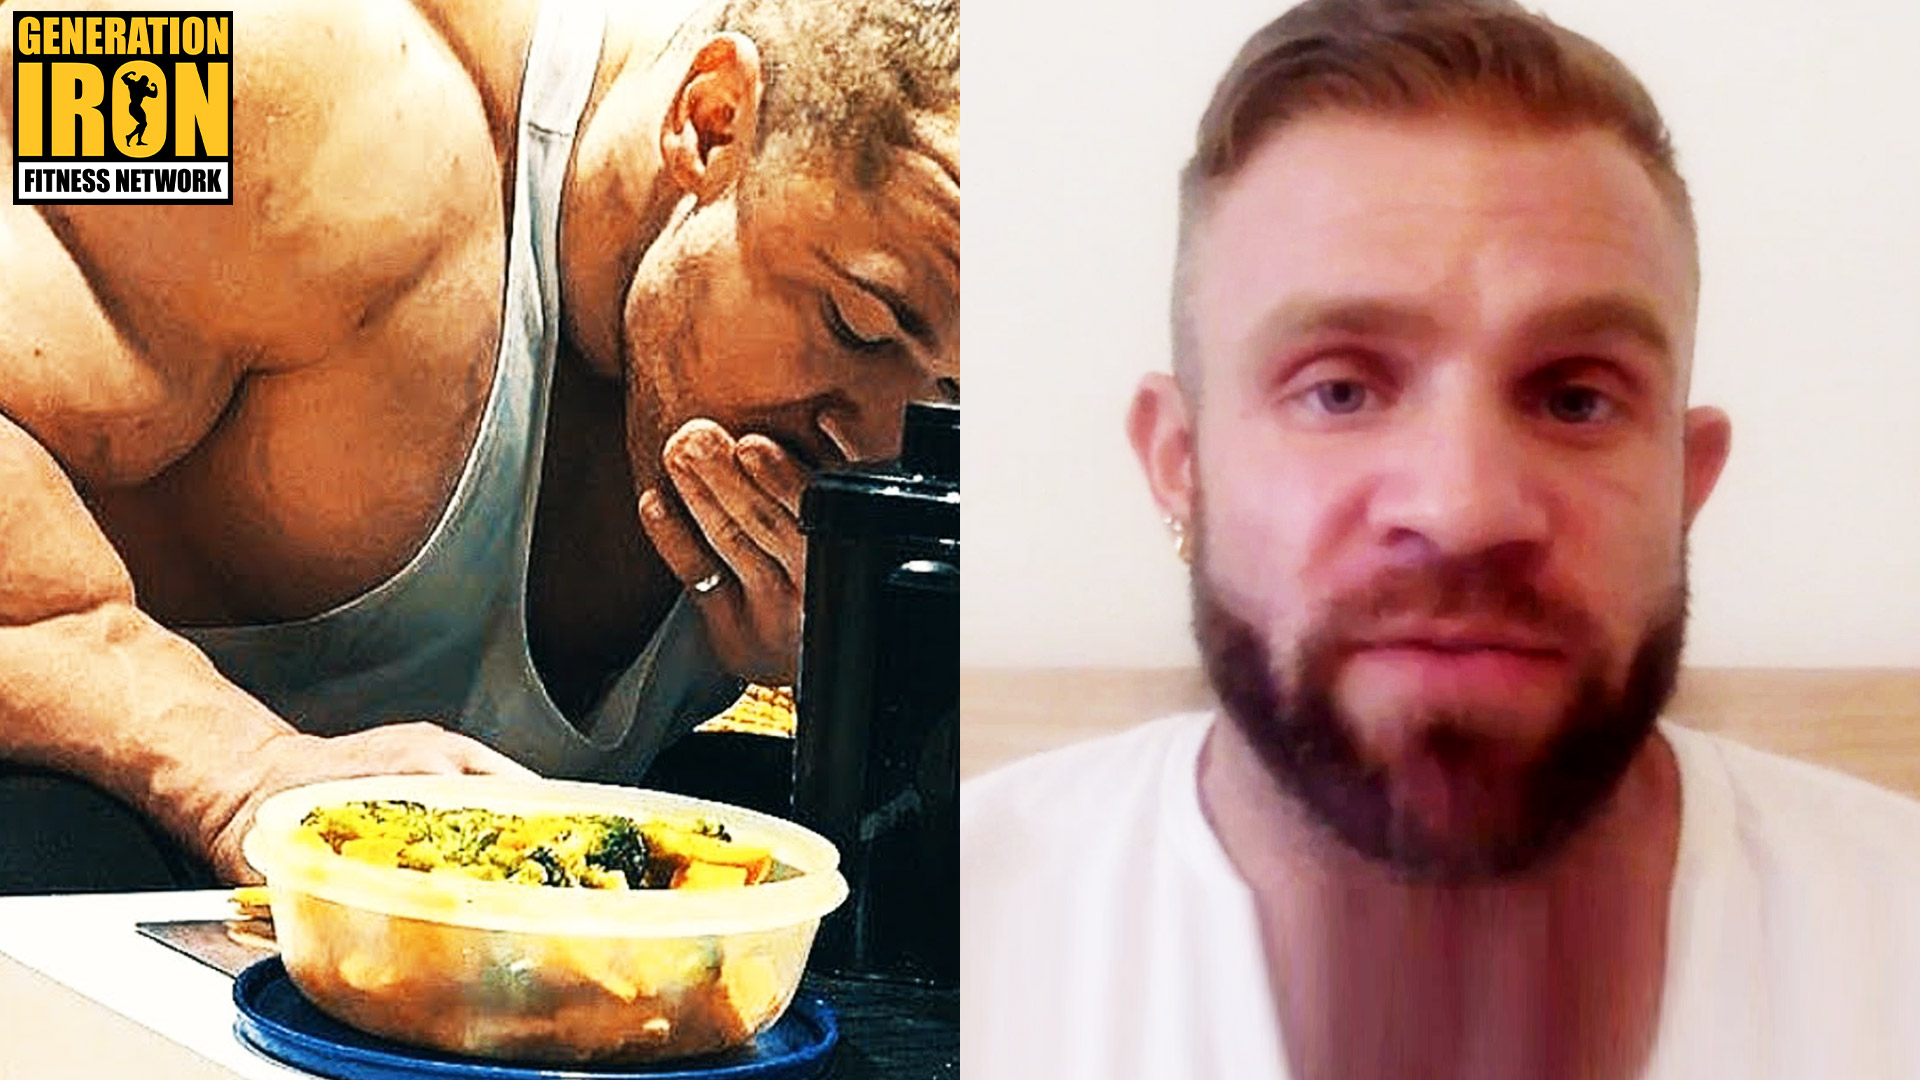 Iain Valliere: The Struggle Of Mass Monster Eating & Vital Tips For Hardgainers